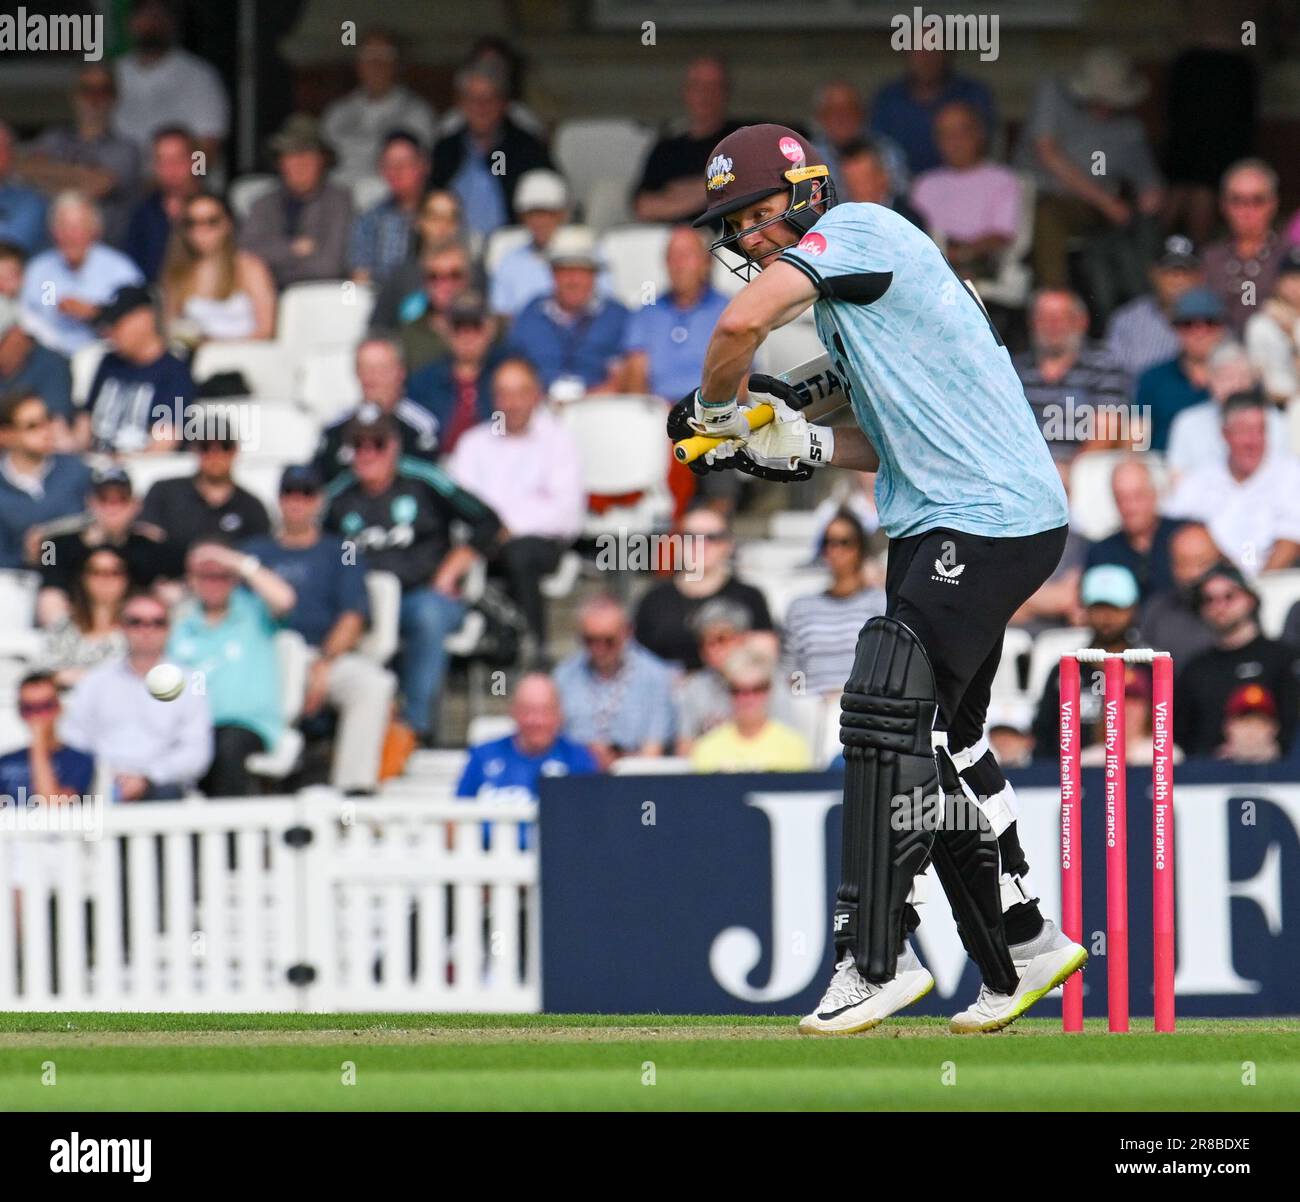 Oval, England. 26 May, 2023. Pictures left to right, Laurie Evans of Surrey County Cricket Club opening the batting at the Vitality Blast match between Surrey versus Glamorgan. Credit: Nigel Bramley/Alamy Live News Stock Photo